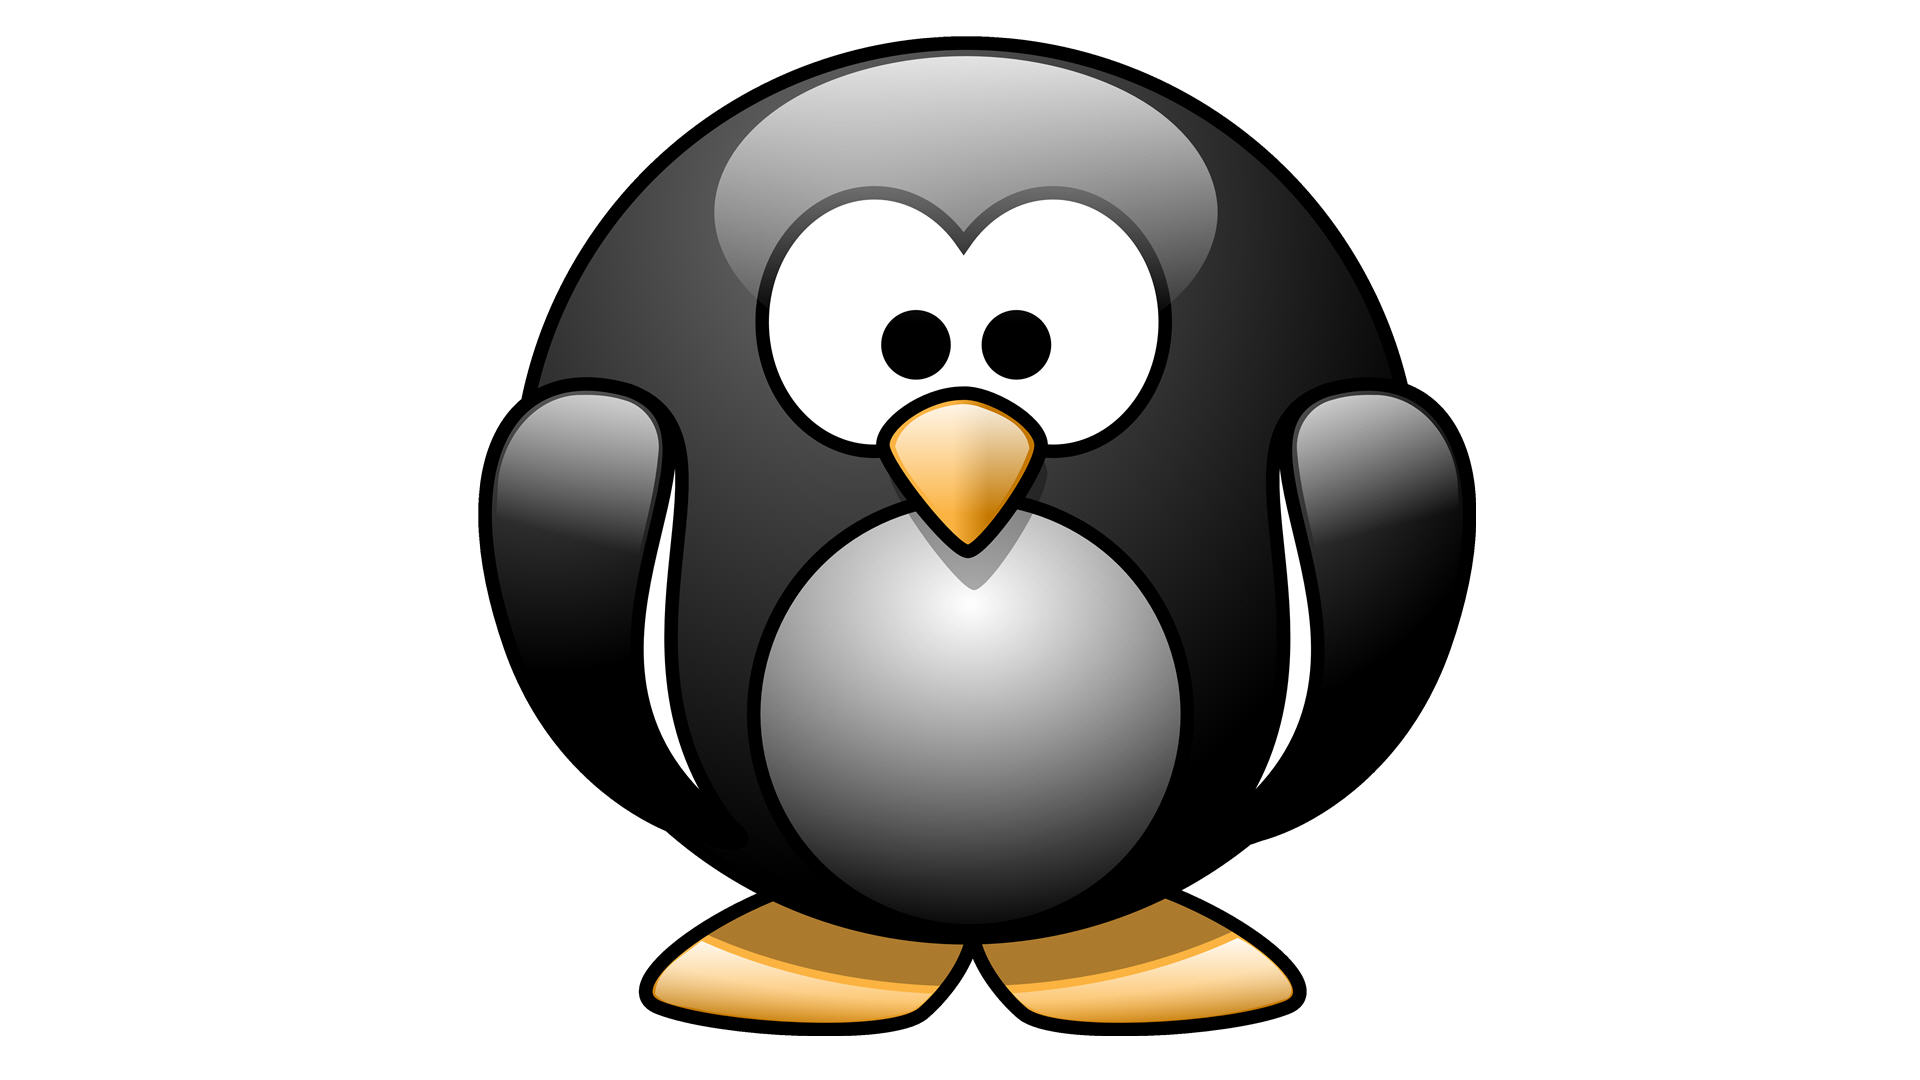 Wallpapers For > Cute Animated Penguins Wallpaper